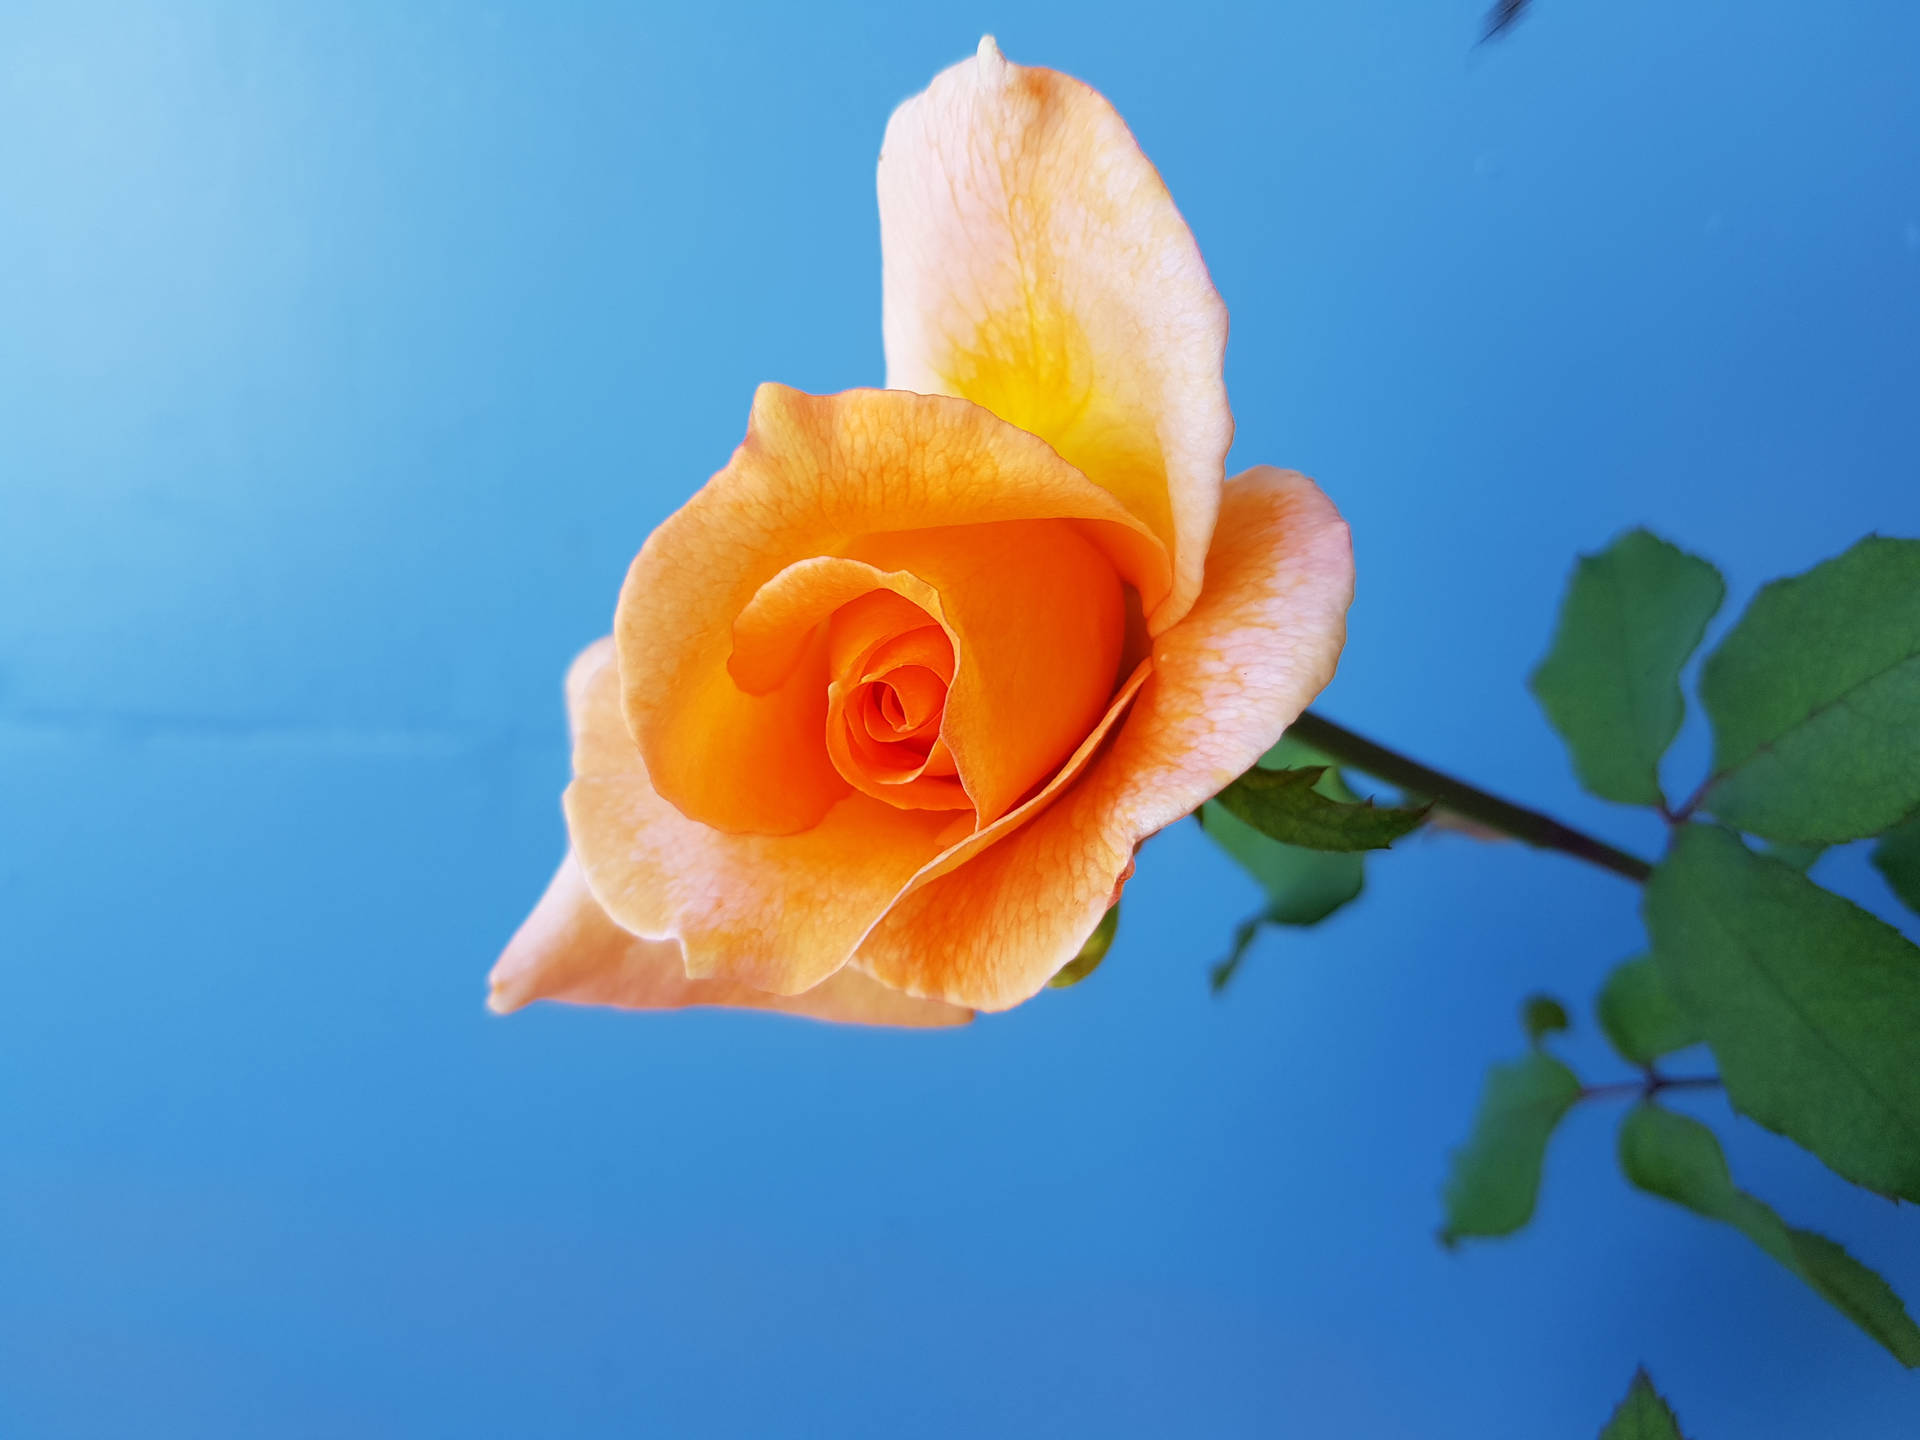 Sky And Yellow Rose Flower Background